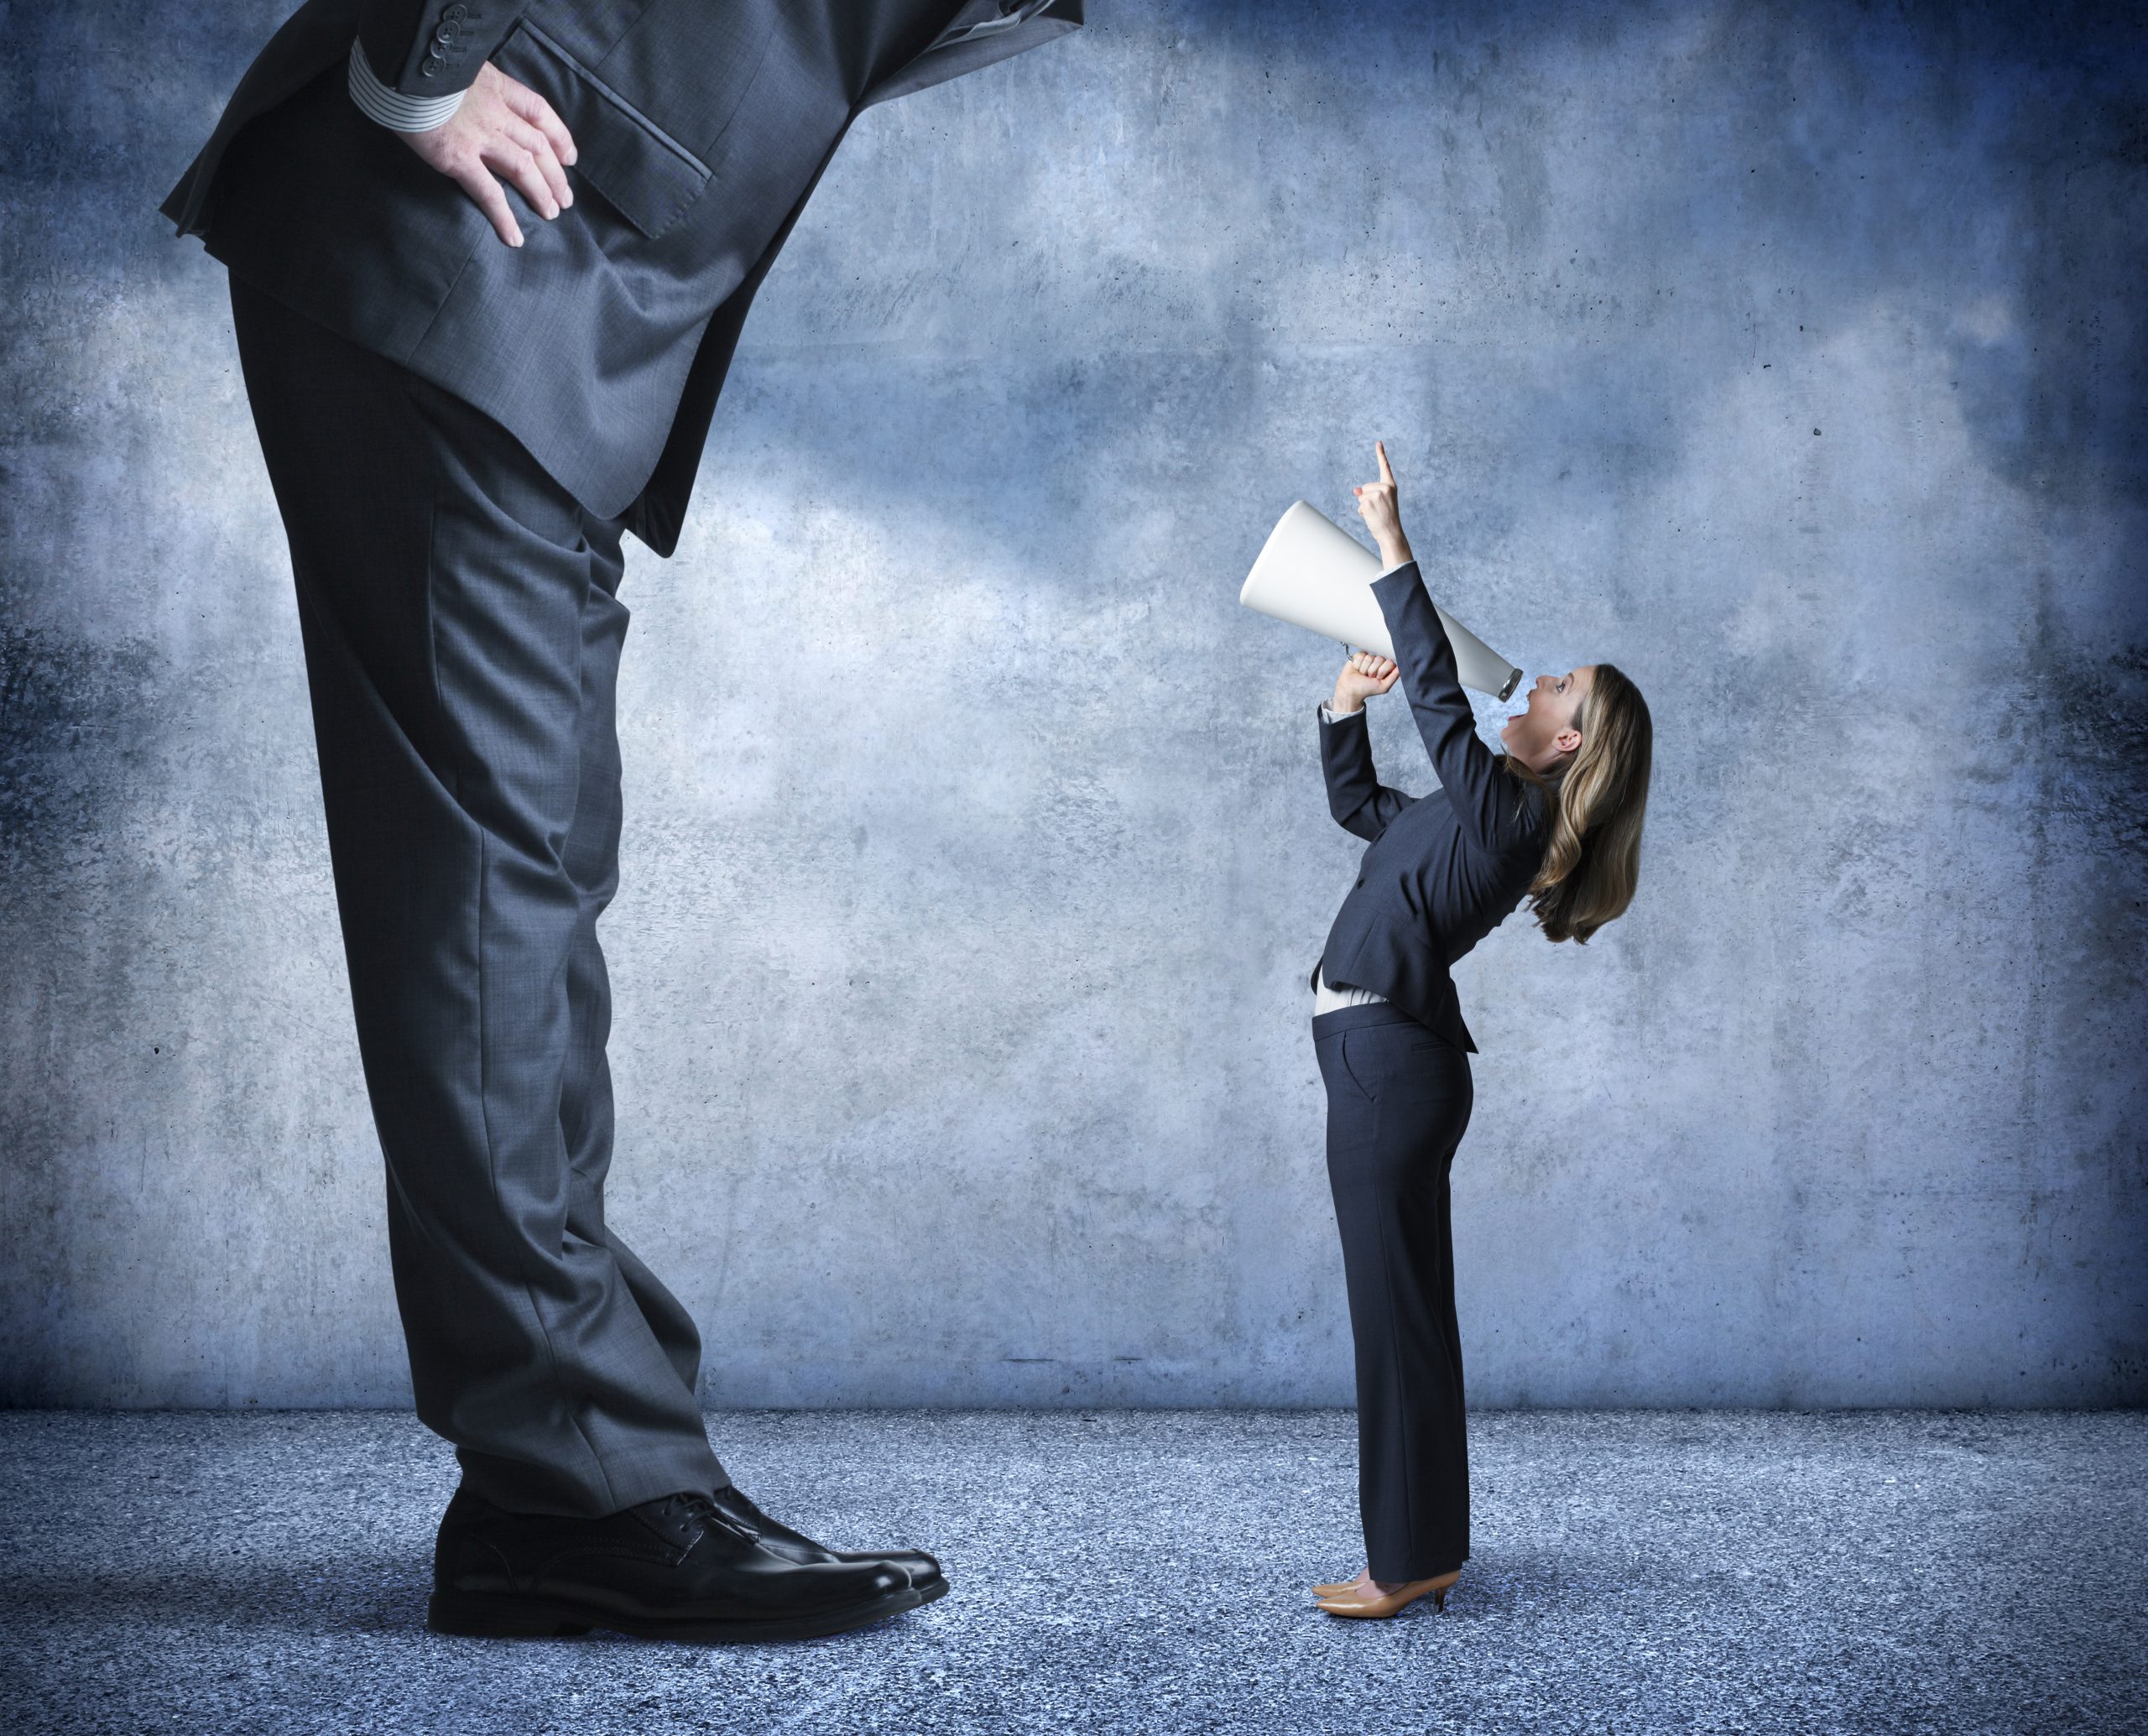 A businesswoman shouts through a megaphone and points up towards a much larger businessman who is standing over her.